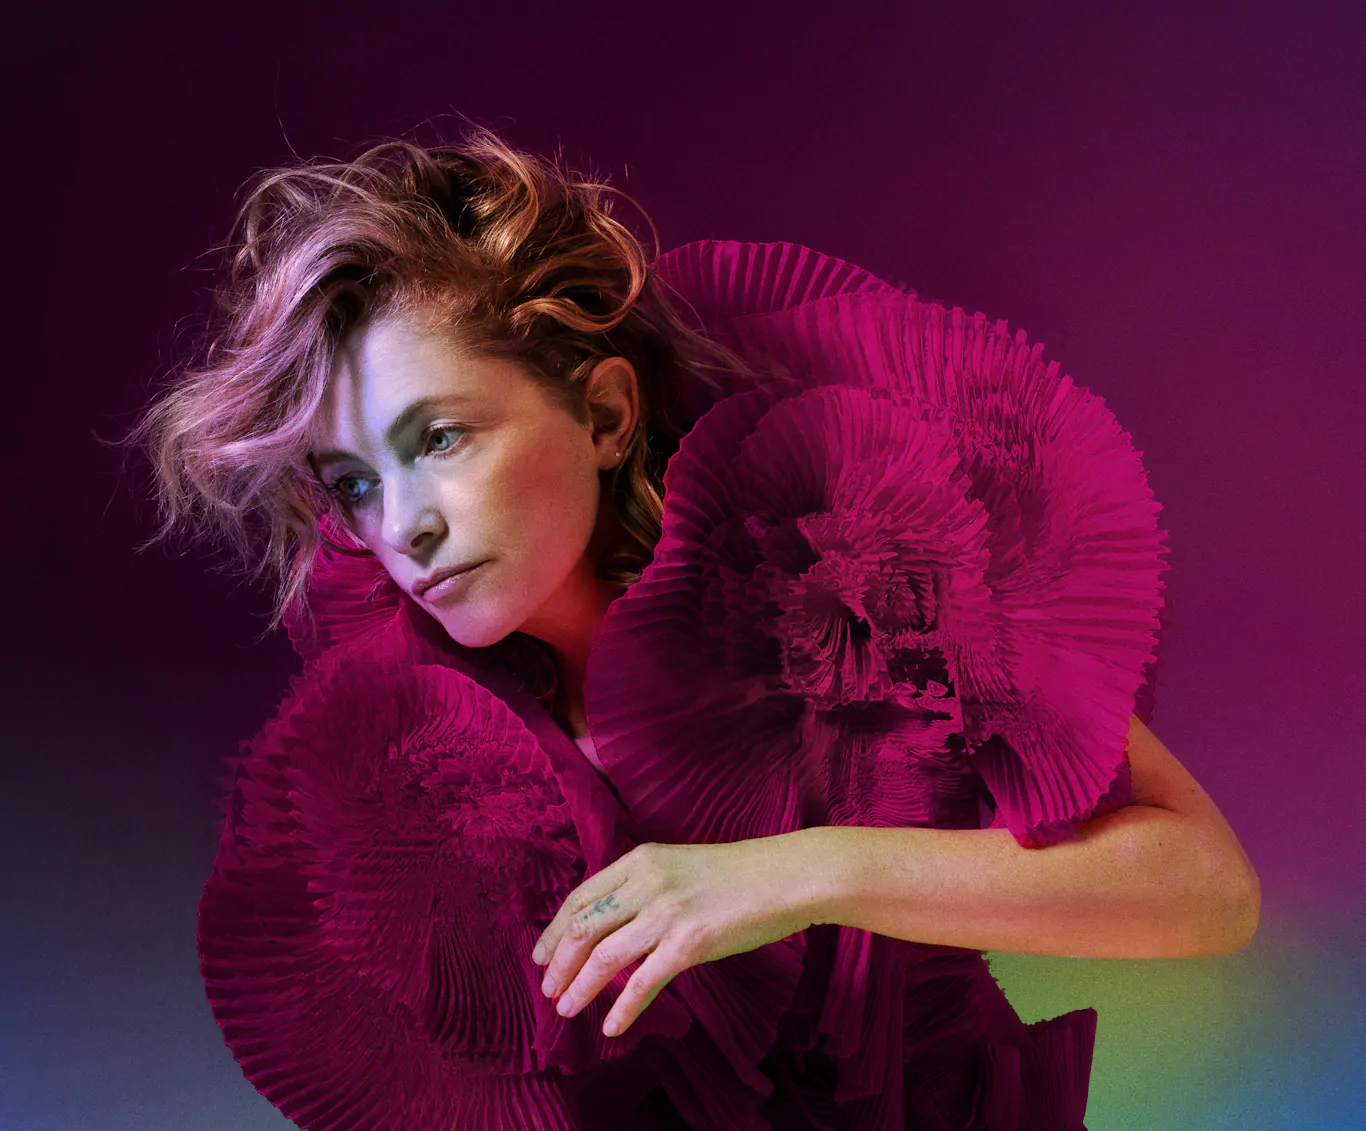 ALISON GOLDFRAPP & PAUL WOOLFORD release their new collaboration ‘Fever’